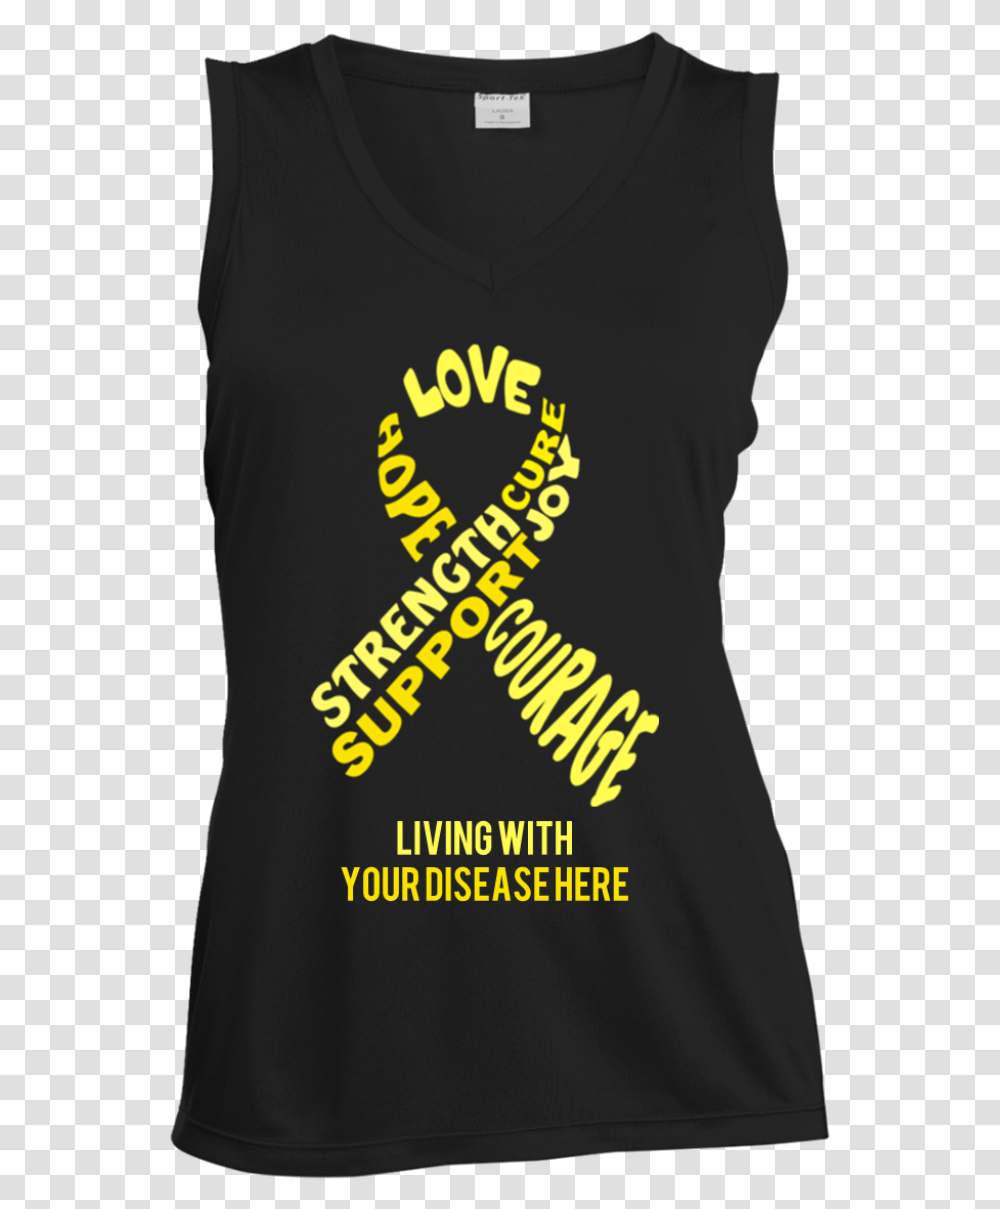 Customisable Yellow Awareness Ribbon With Words Women Wherever You Will Go Lyrics, Sleeve, Poster, Advertisement Transparent Png